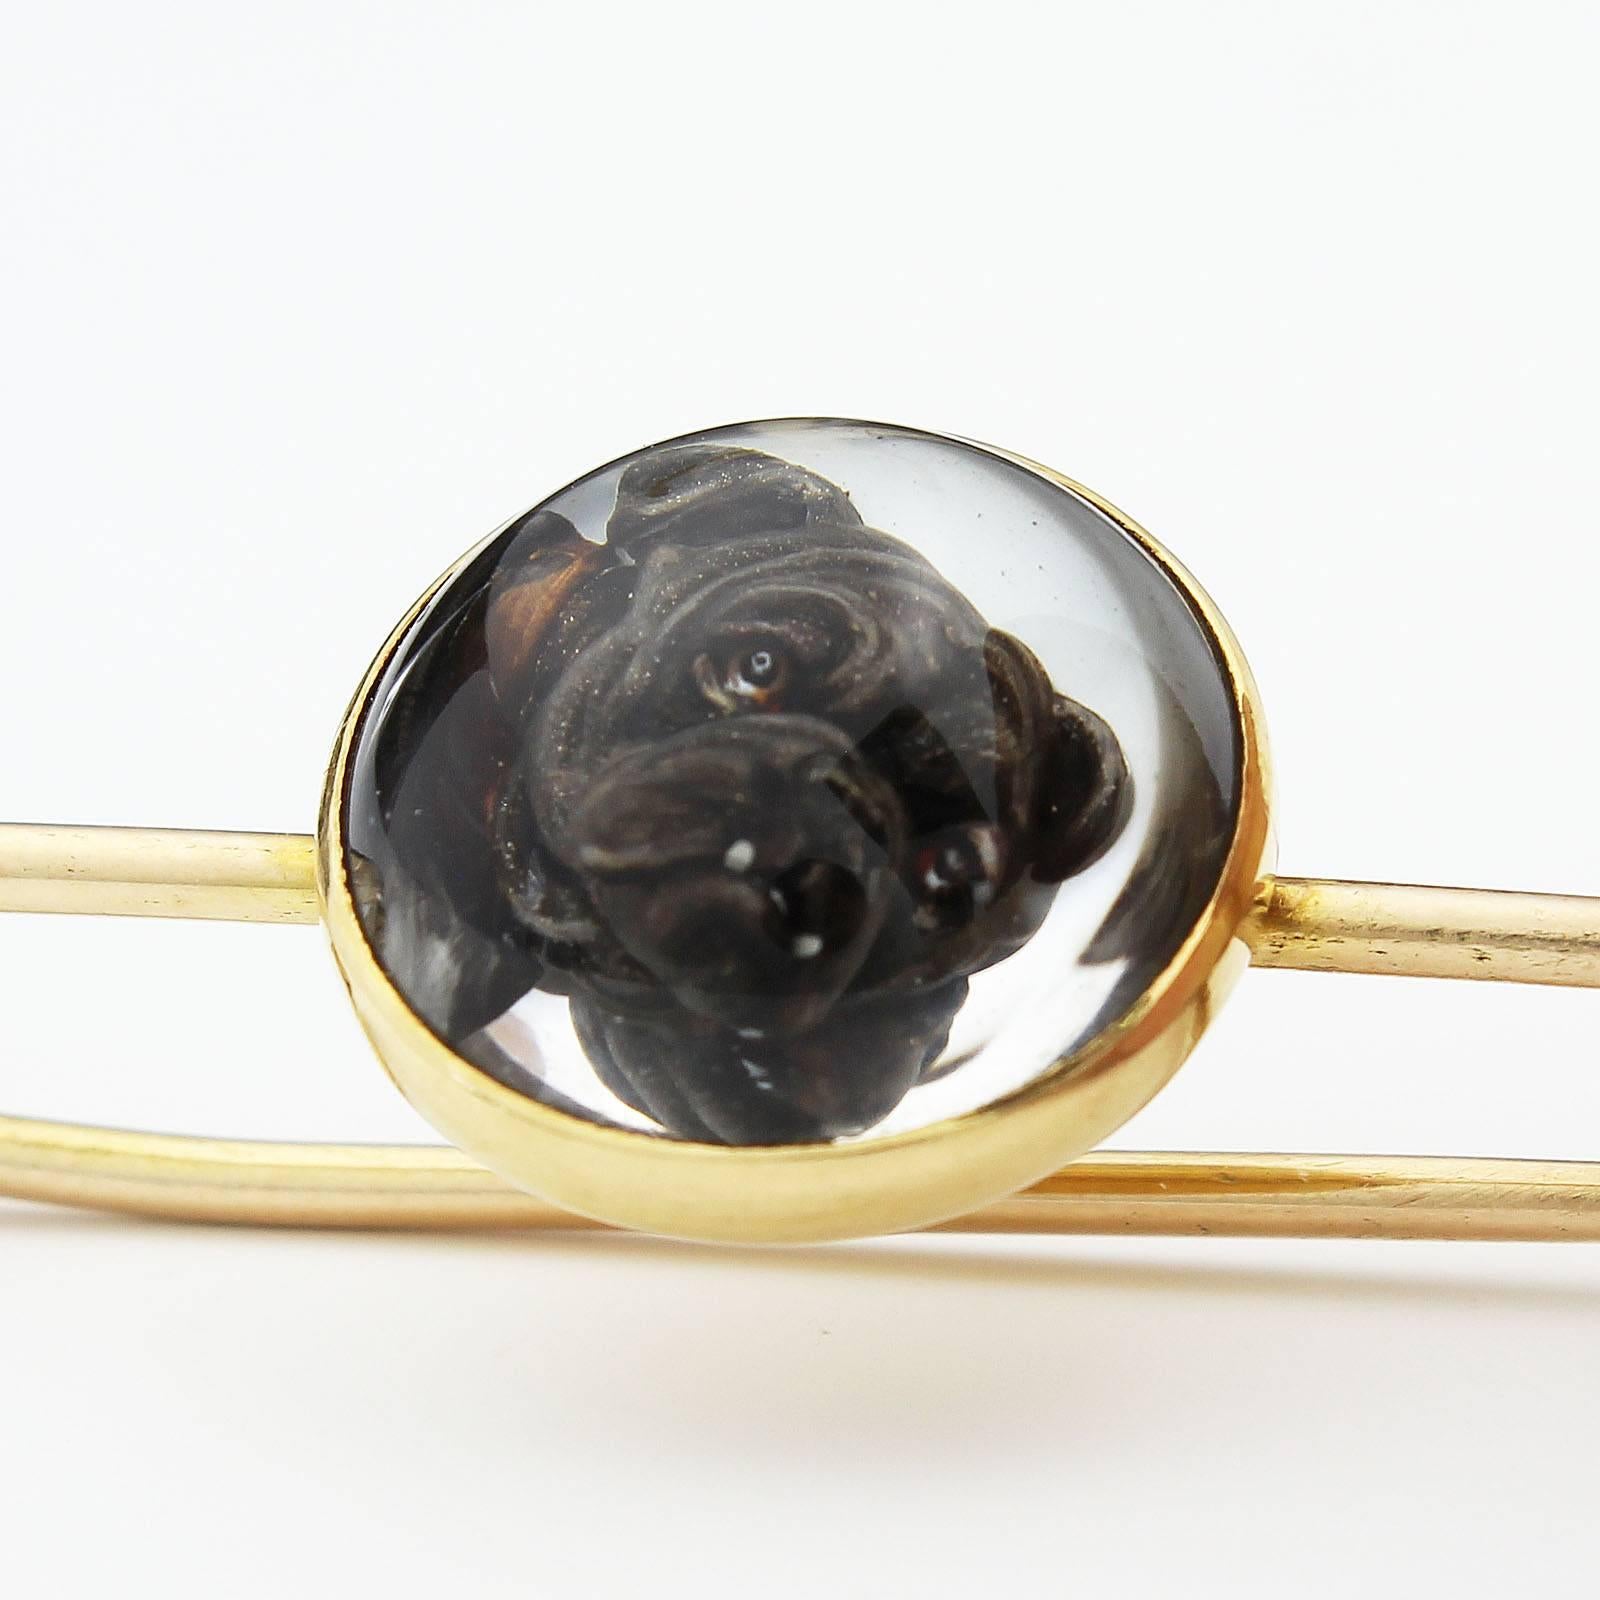 Early 20th C 18 Karat Gold Bulldog Rock Crystal Reverse-Carved Intaglio Brooch For Sale 1